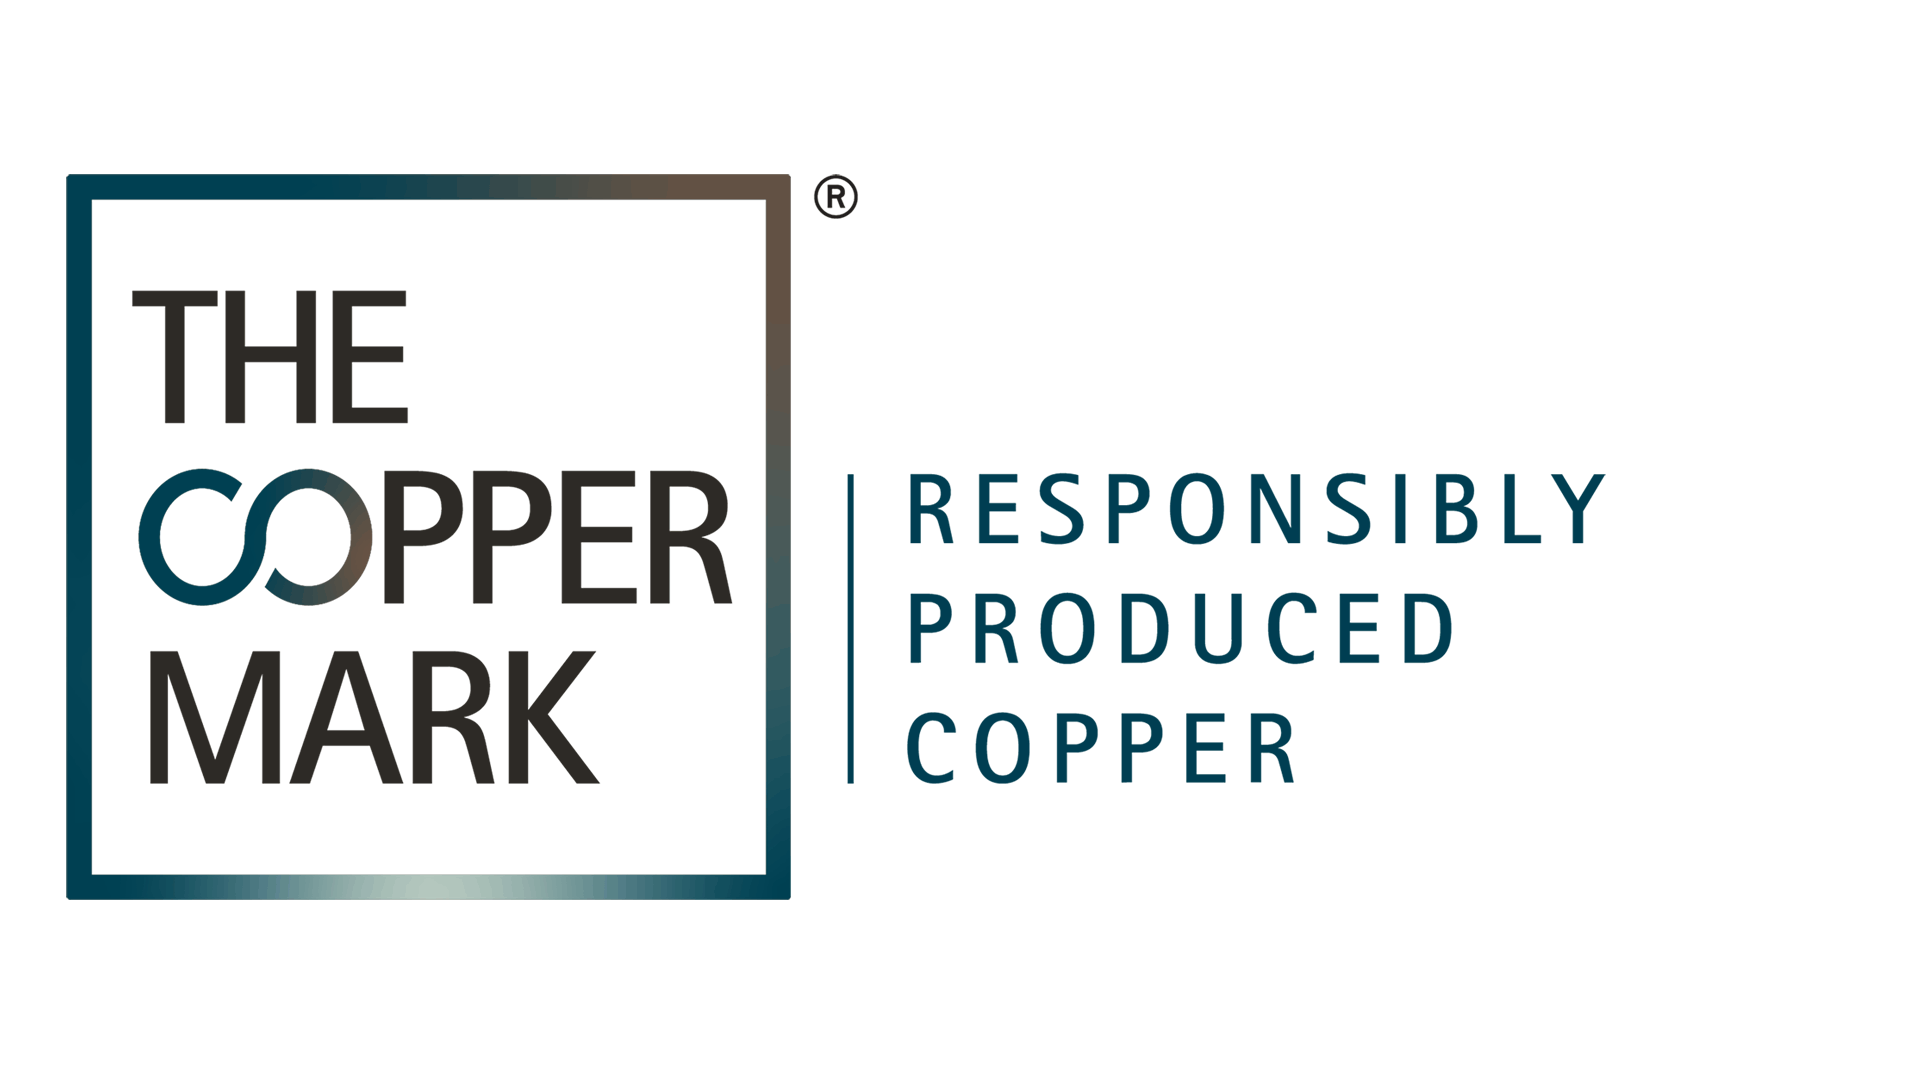 The Copper Mark: Responsibly Produced Copper